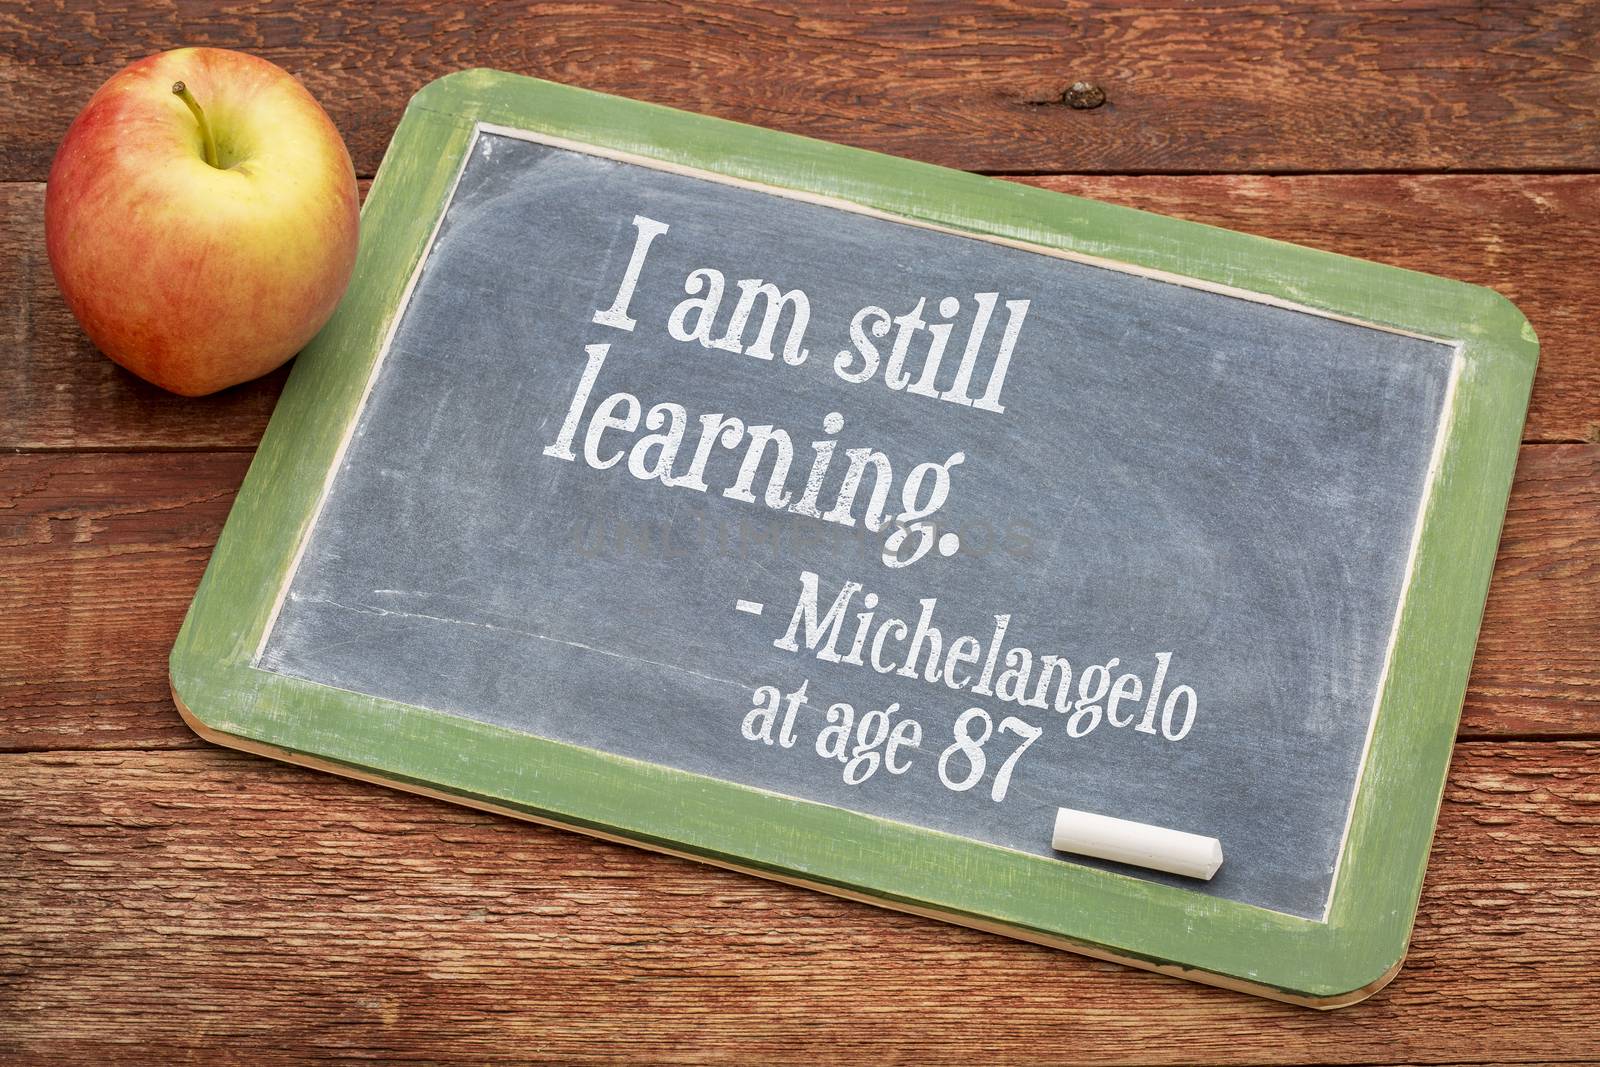 I am still learning - Michelangelo at age 87 - continuous education concept  on a slate blackboard against red barn wood